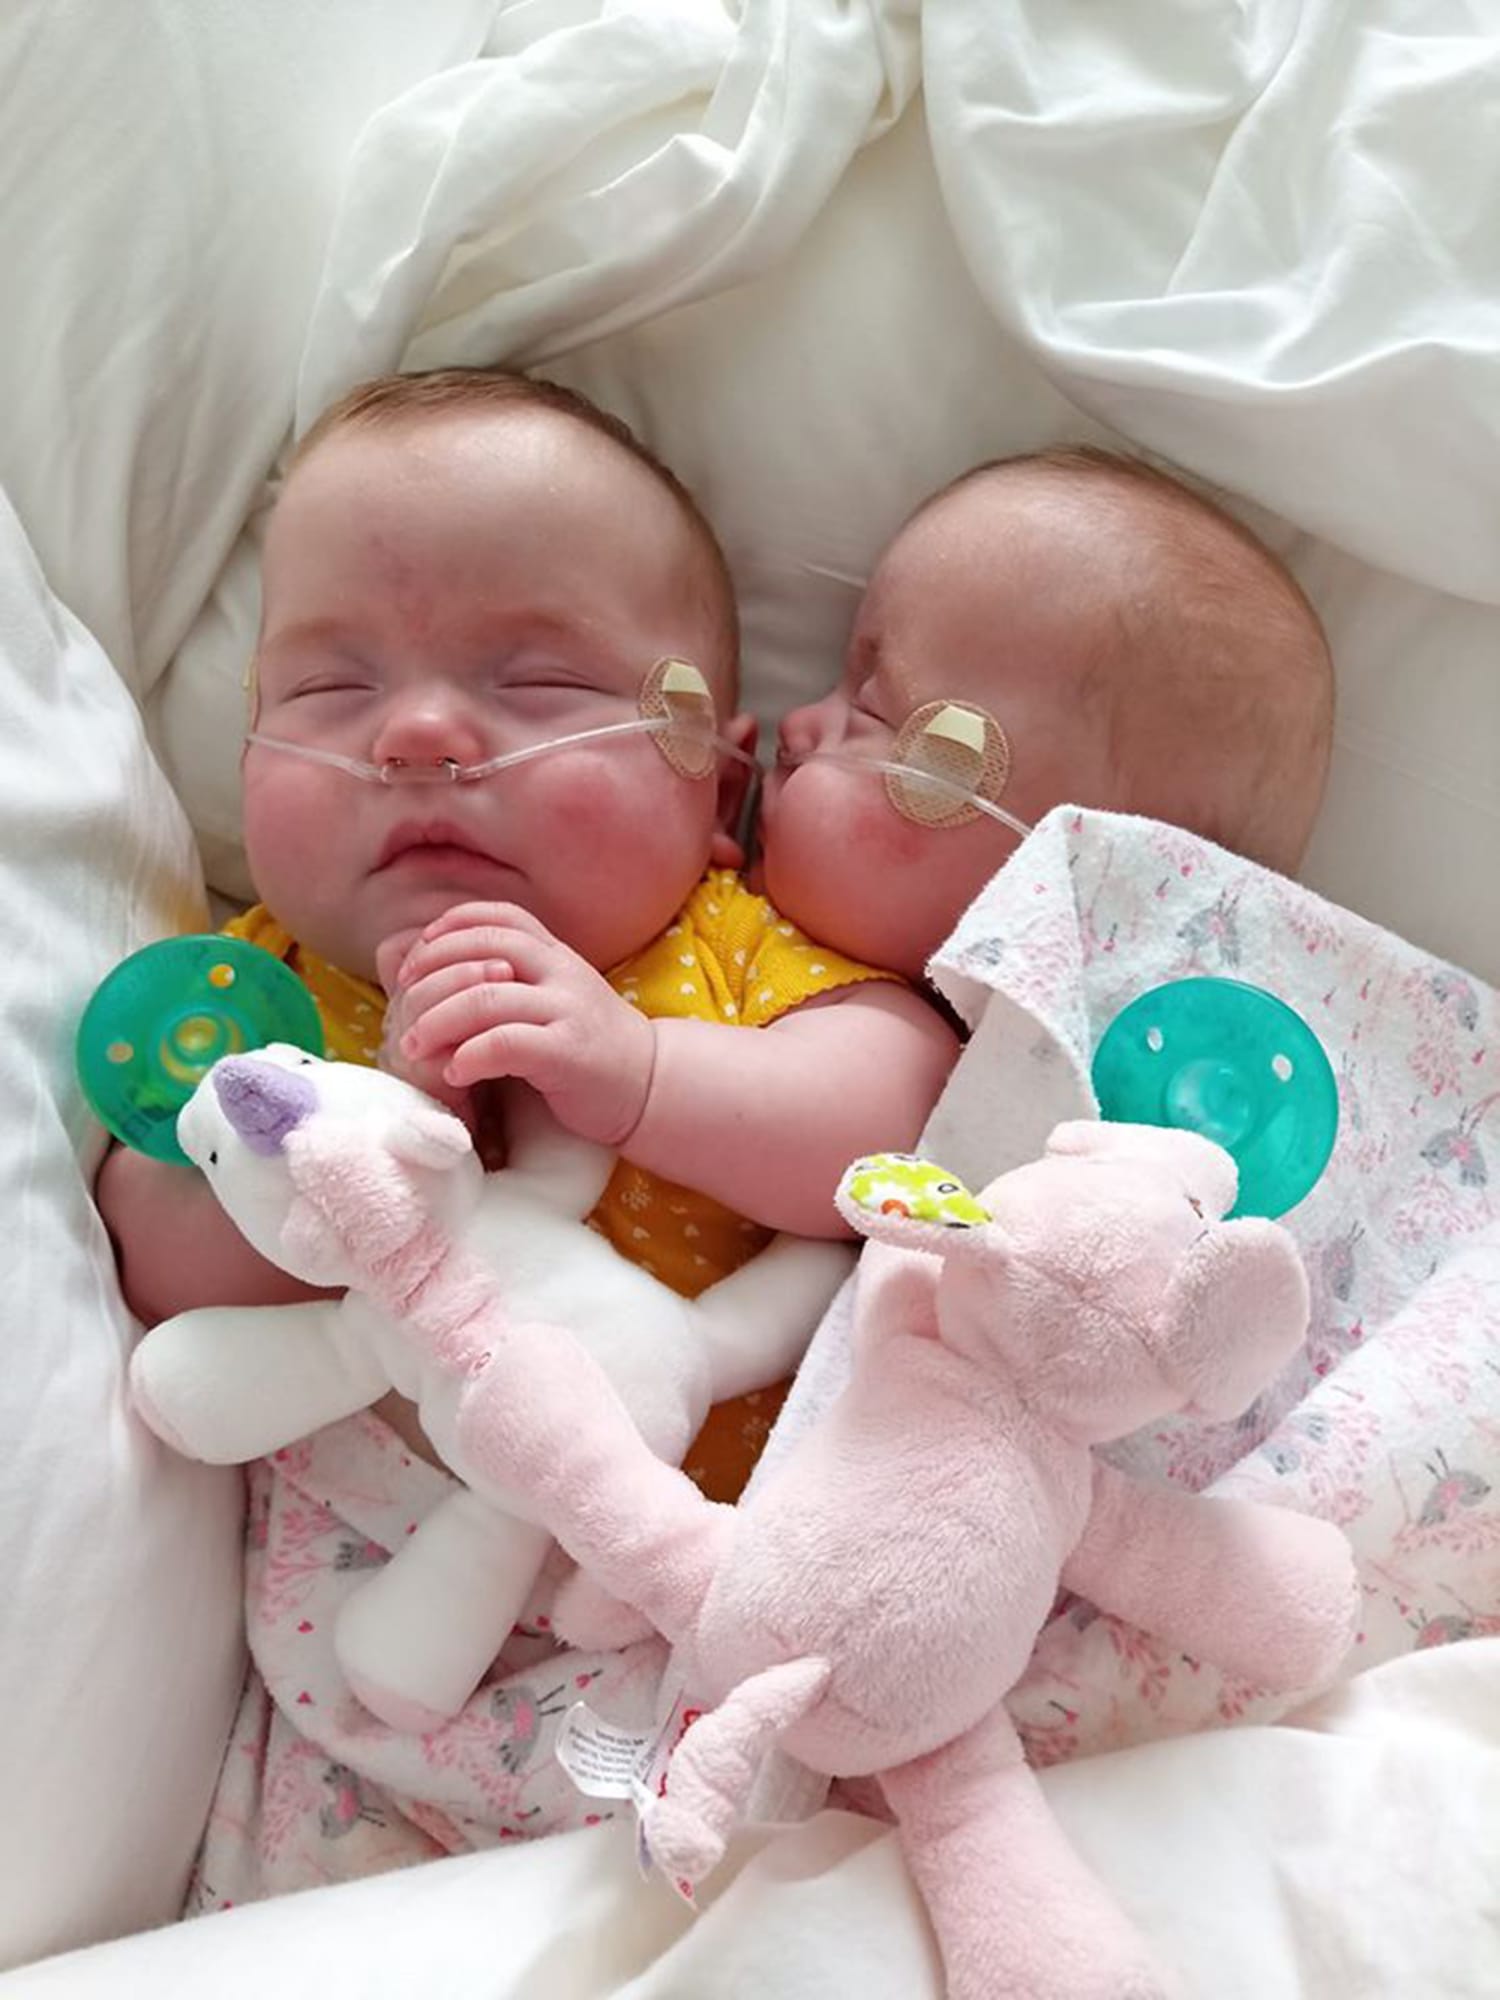 Born At 22 Weeks Twin Micropreemies Among Youngest To Survive